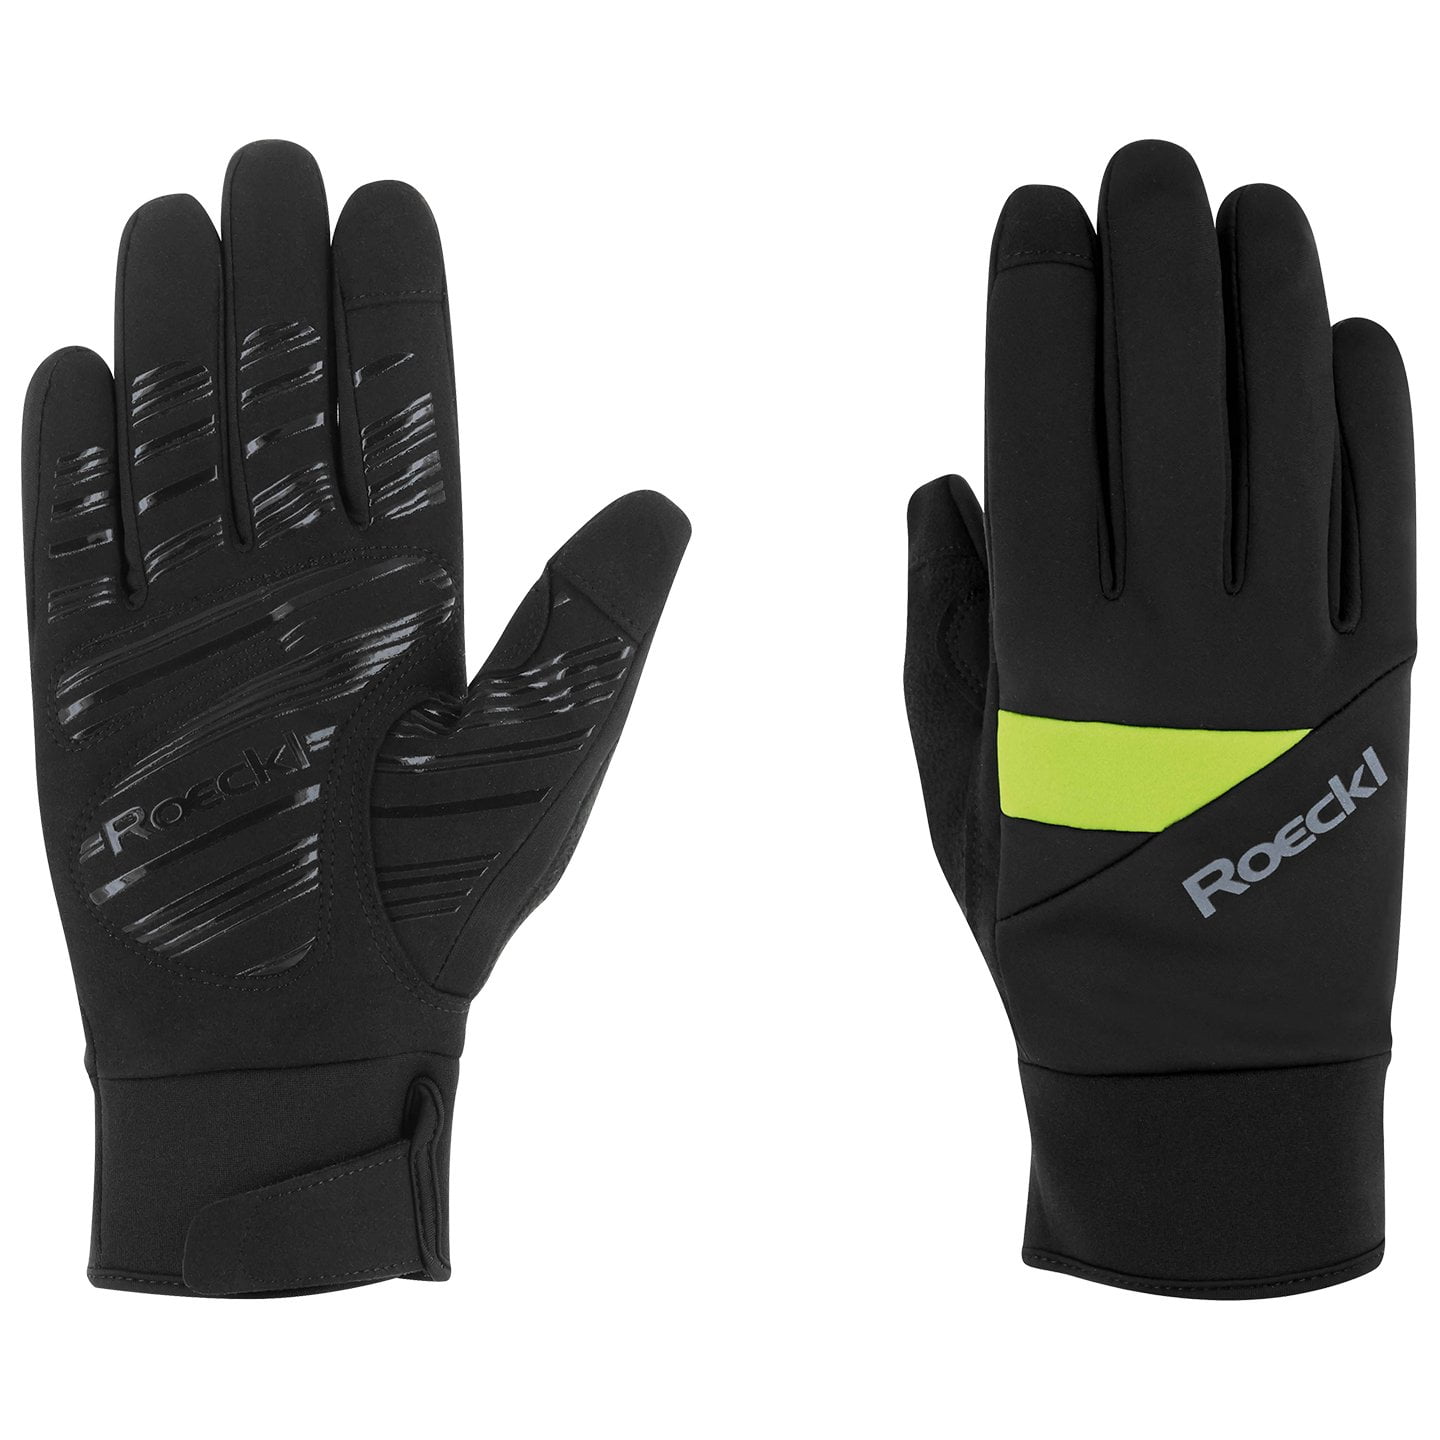 ROECKL Reichenthal Winter Gloves Winter Cycling Gloves, for men, size 10,5, Bike gloves, Bike clothing